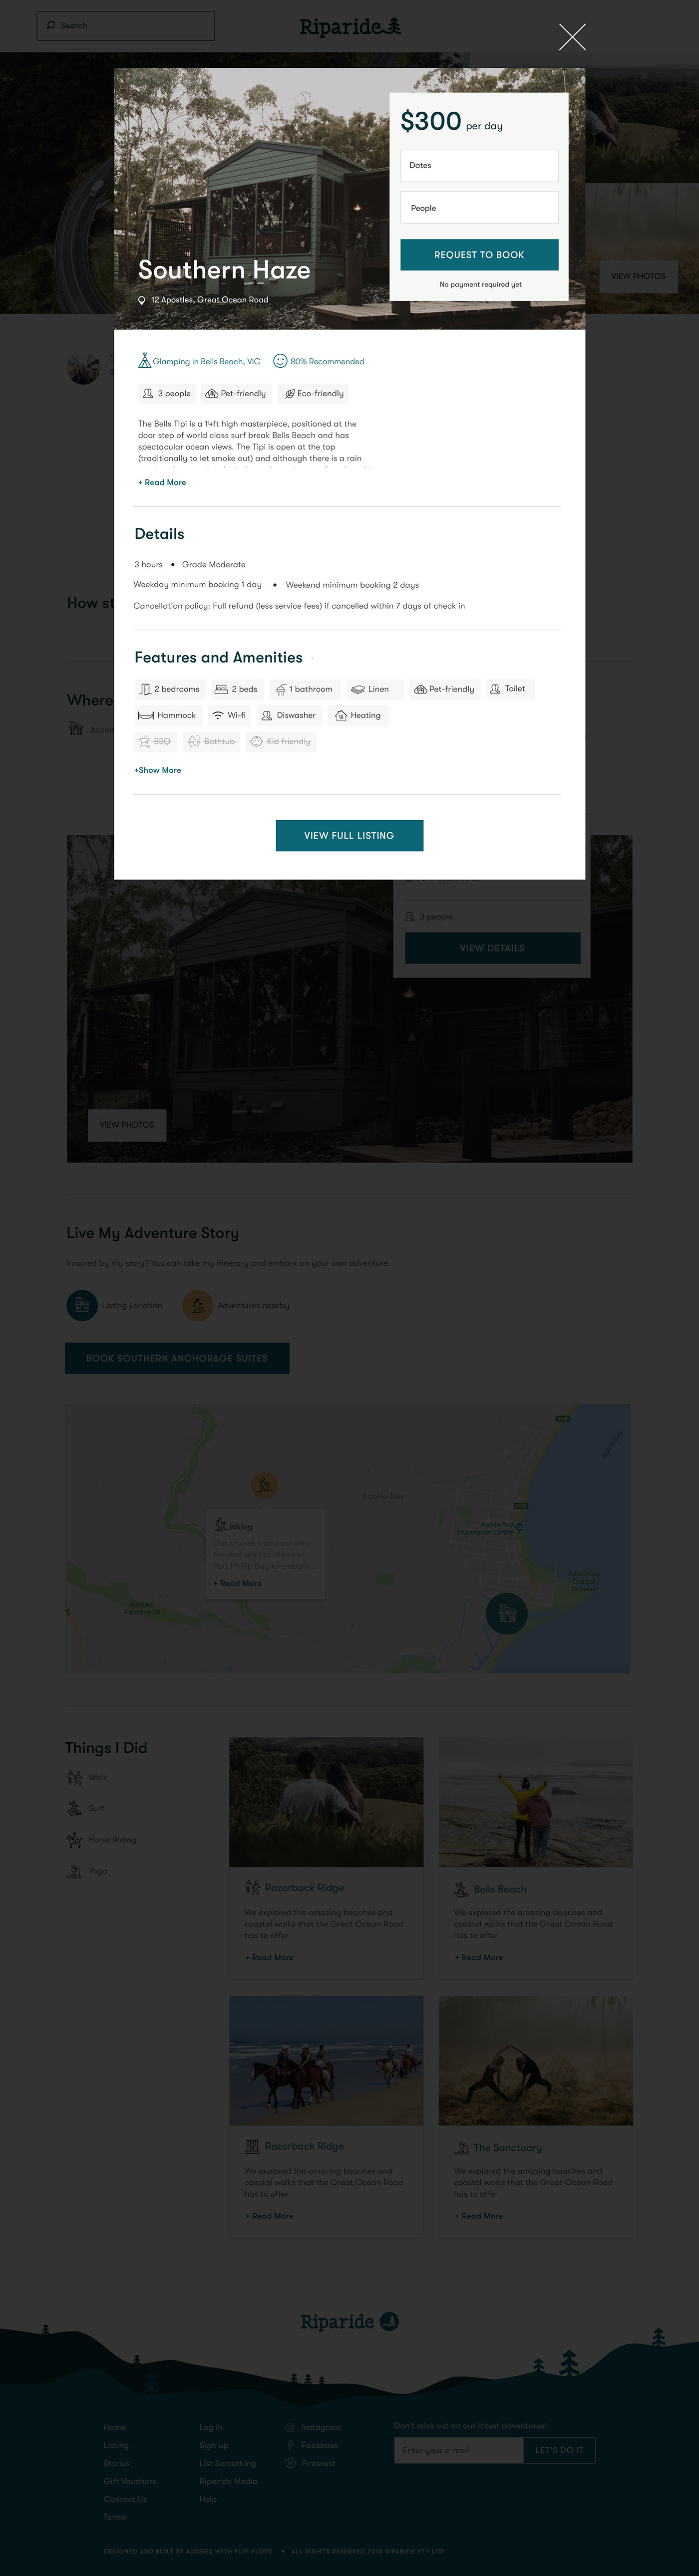 Accommodation airbnb design UI ux mobile